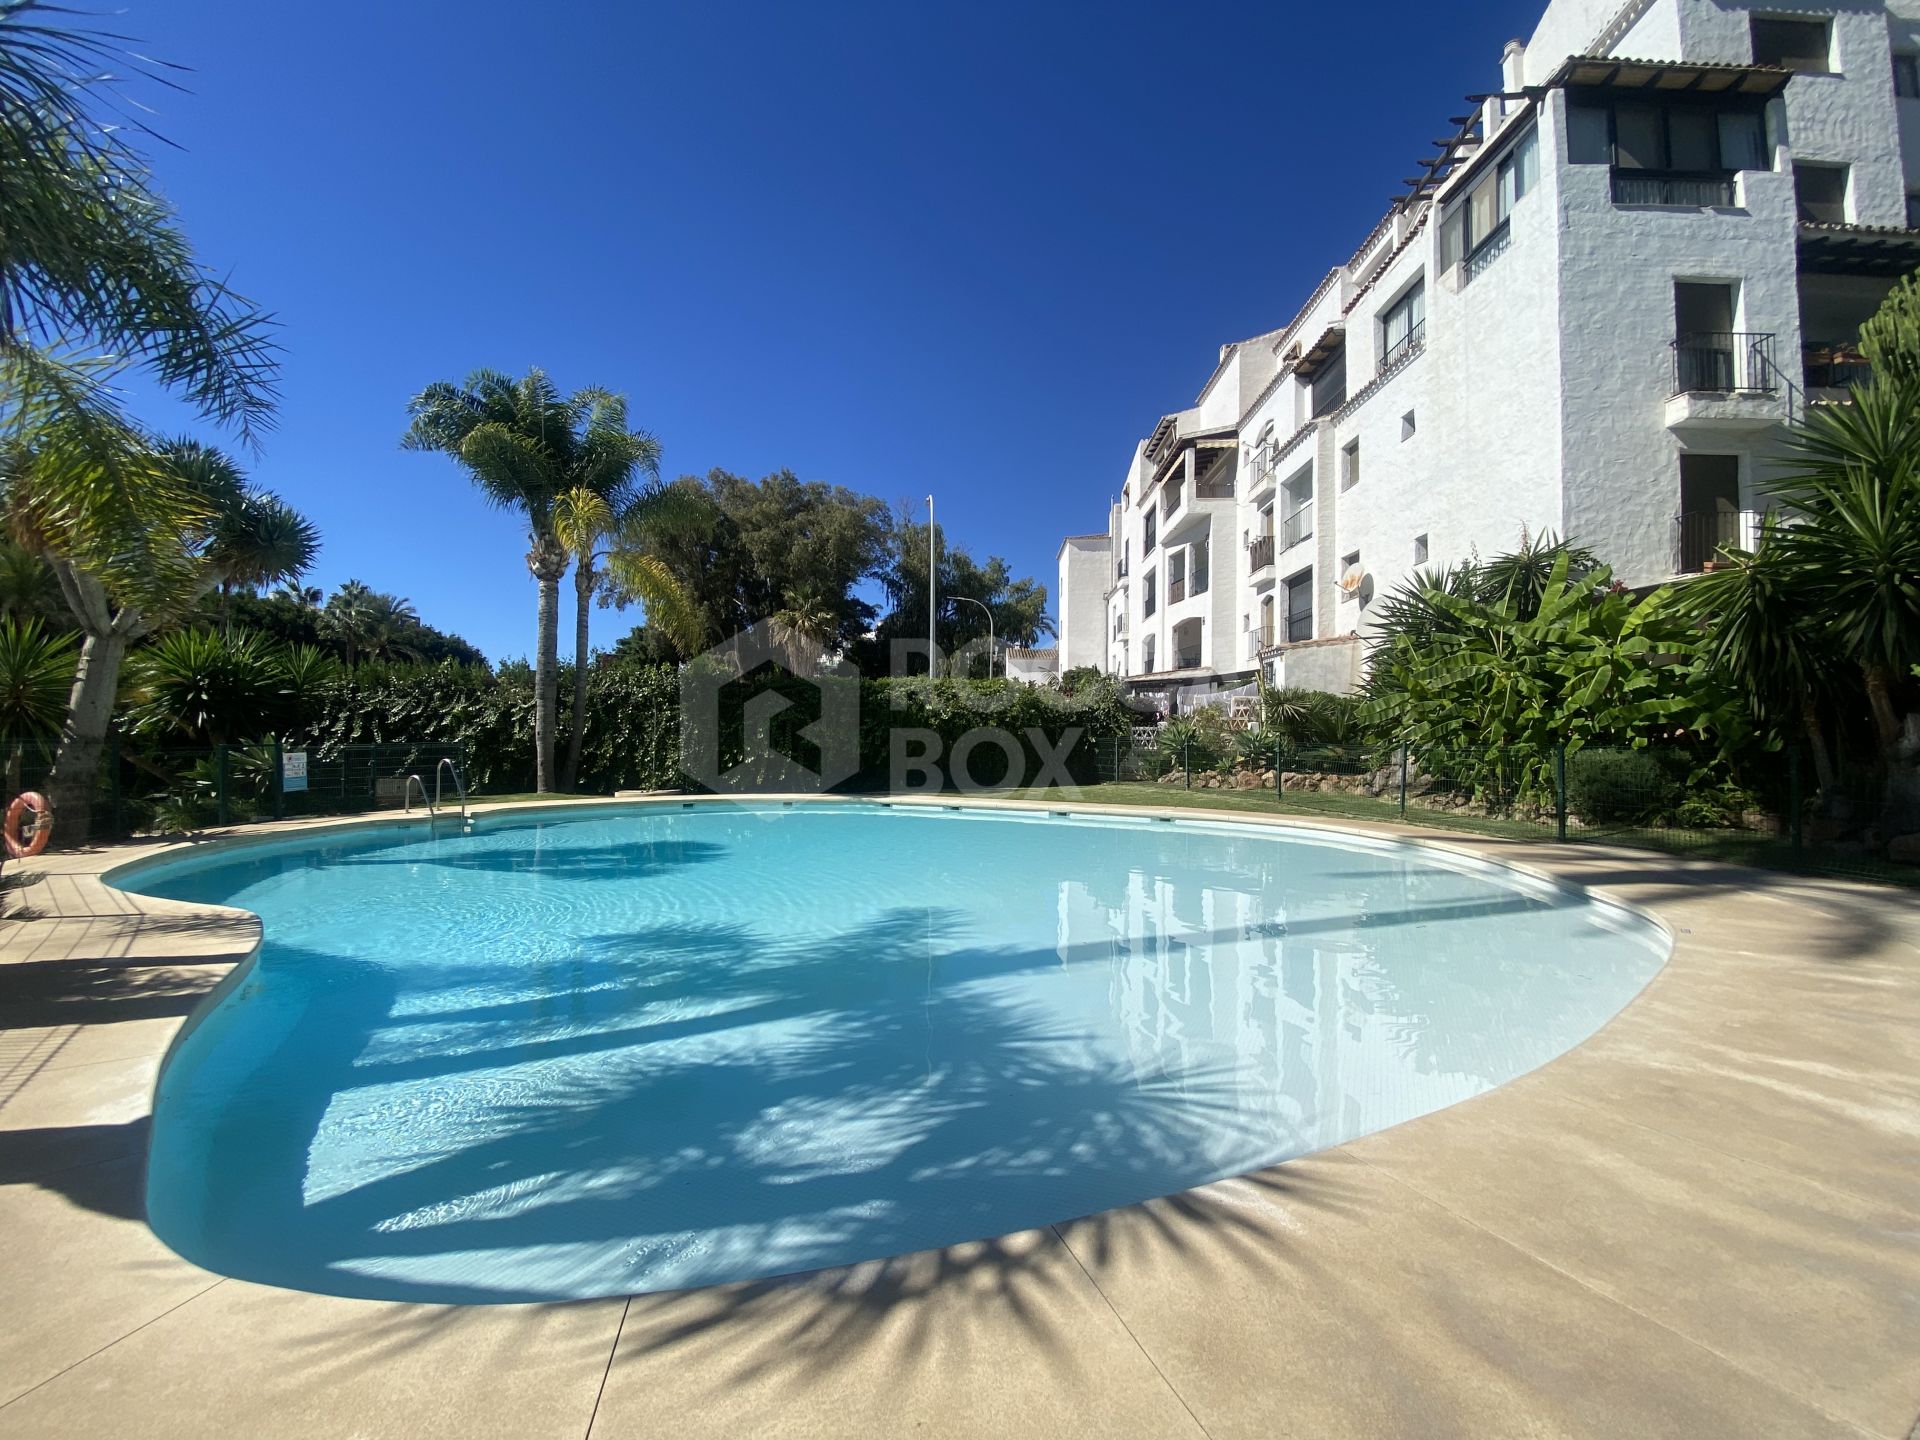 APARTMENT IN THE CENTER OF PUERTO BANÚS